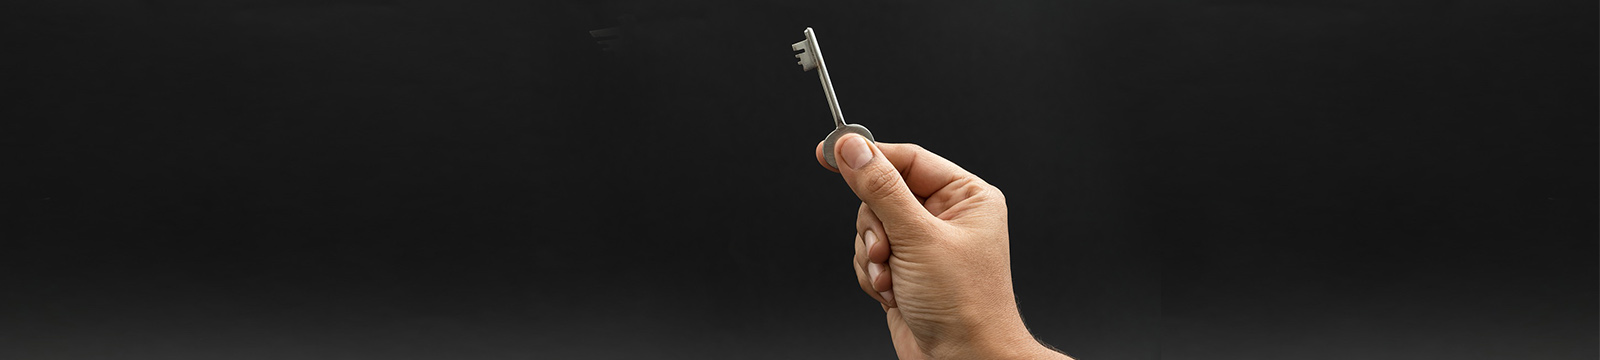 Photo of a hand holding an old fashioned key.